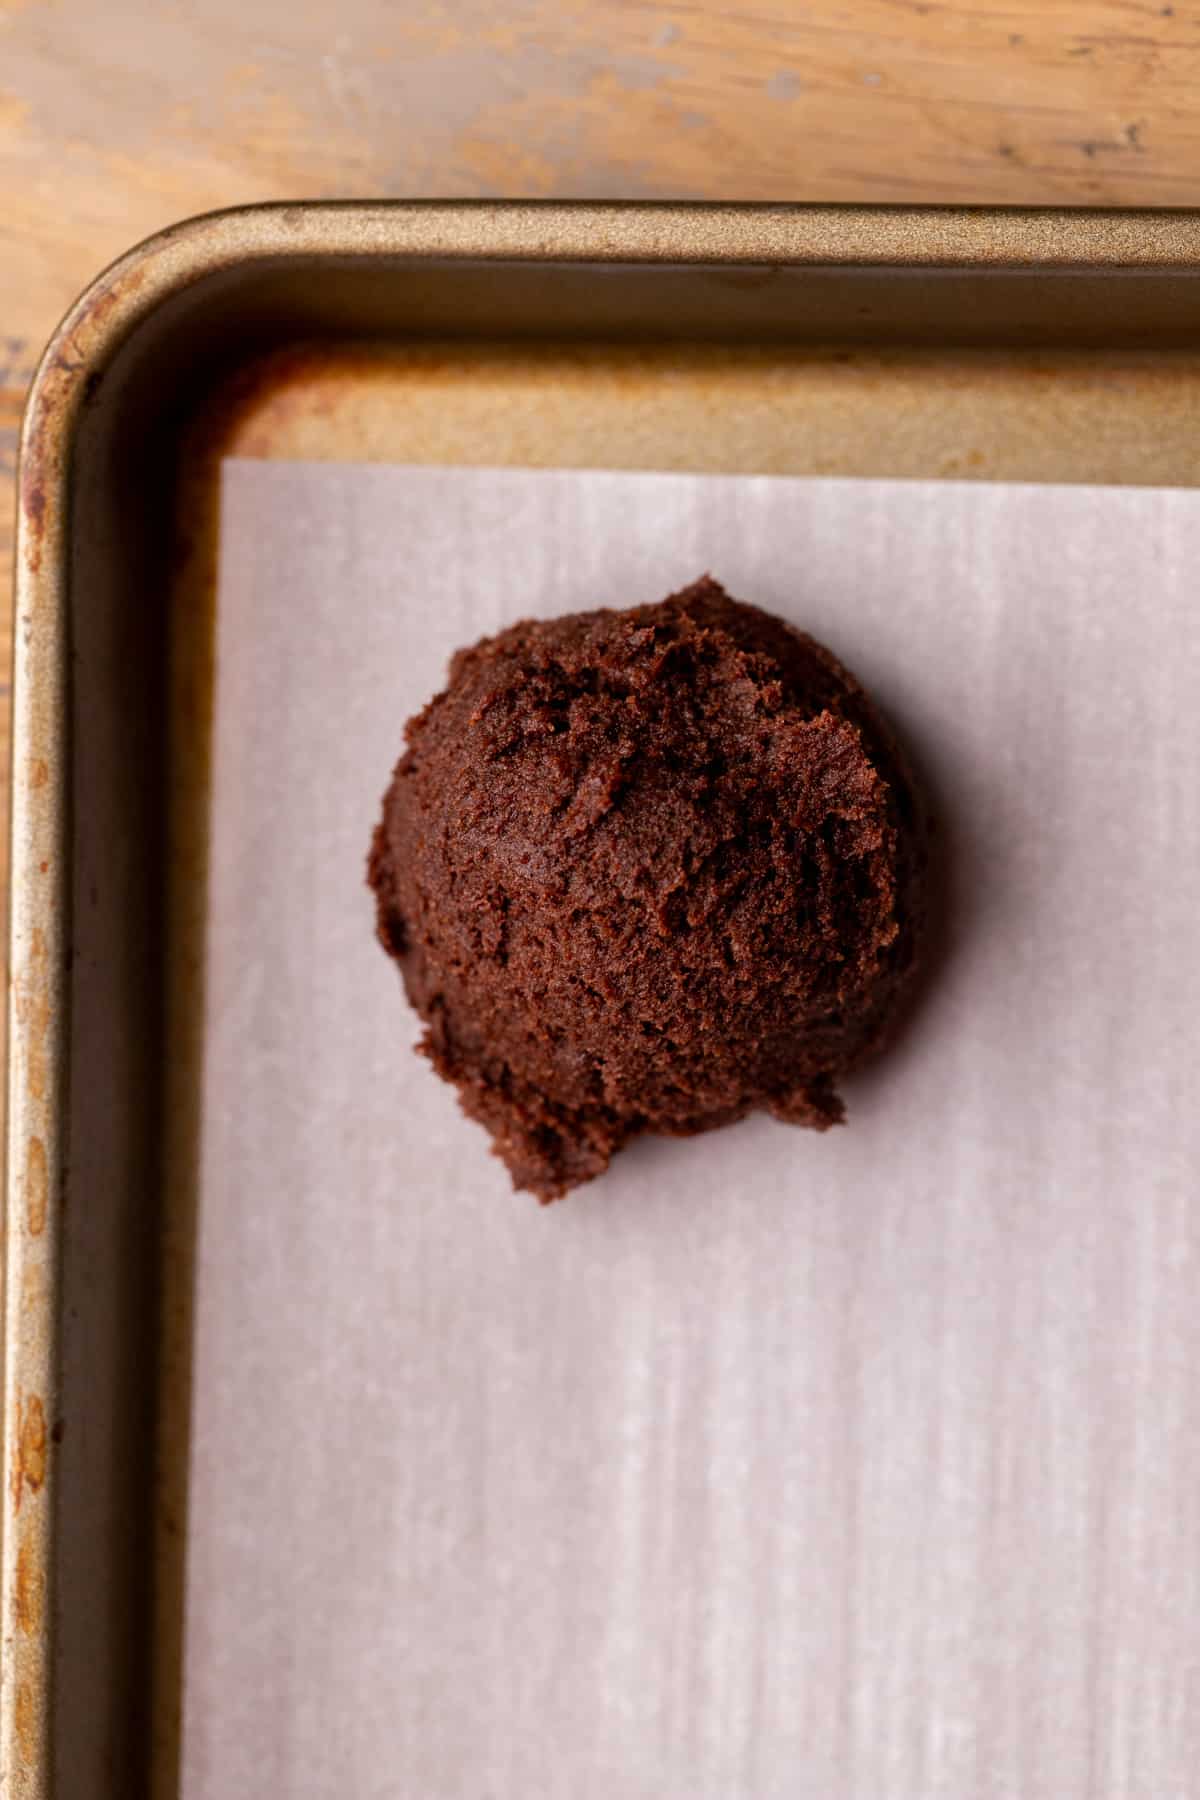 Chocolate cookie dough on a cookie sheet.